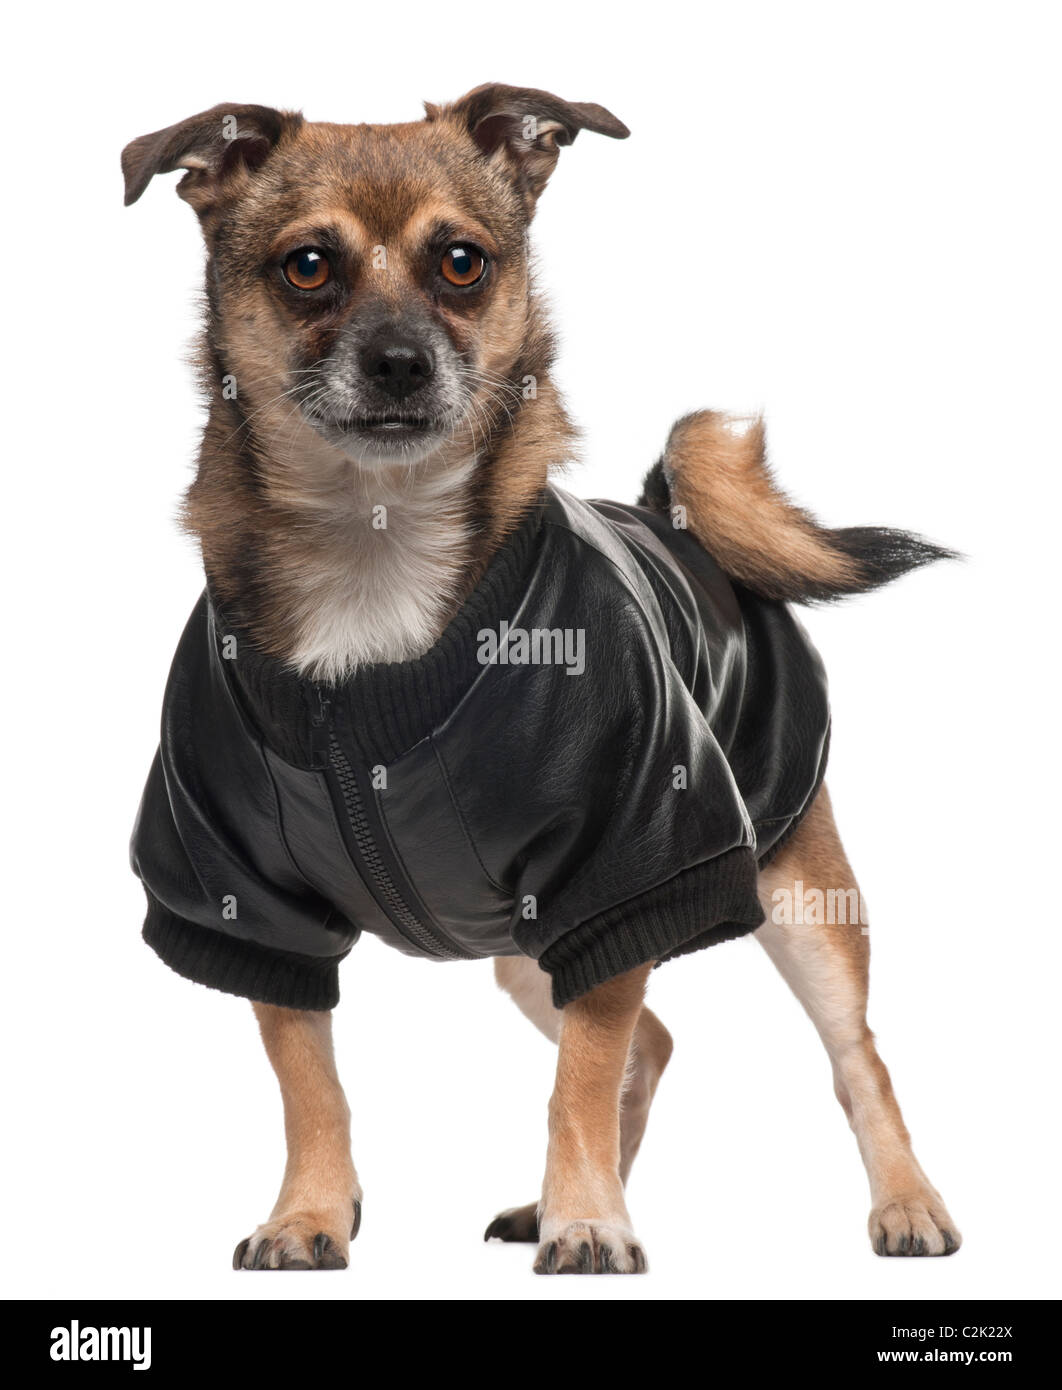 Mixed-breed dog wearing shirt, 6 years old, standing in front of white background Stock Photo